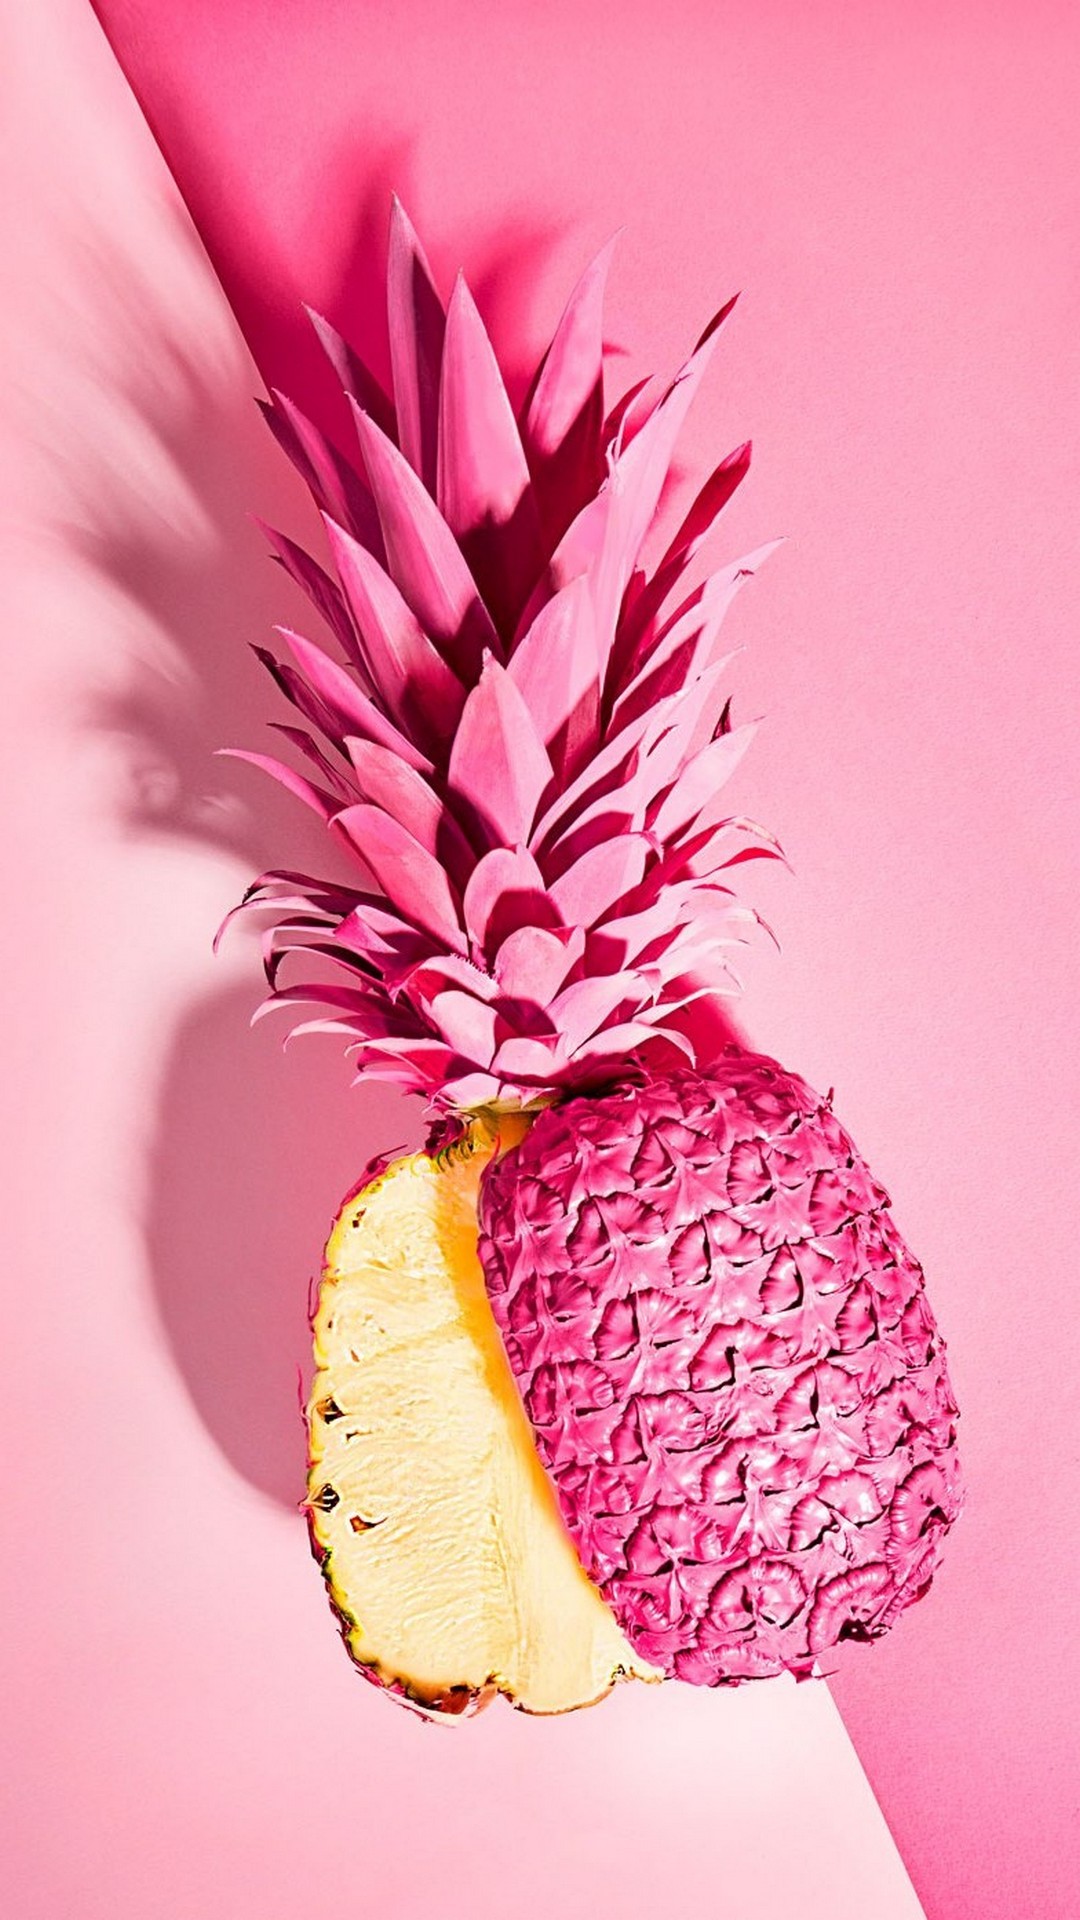 Best Pink Pineapple Wallpaper iPhone - 2021 Android Wallpapers